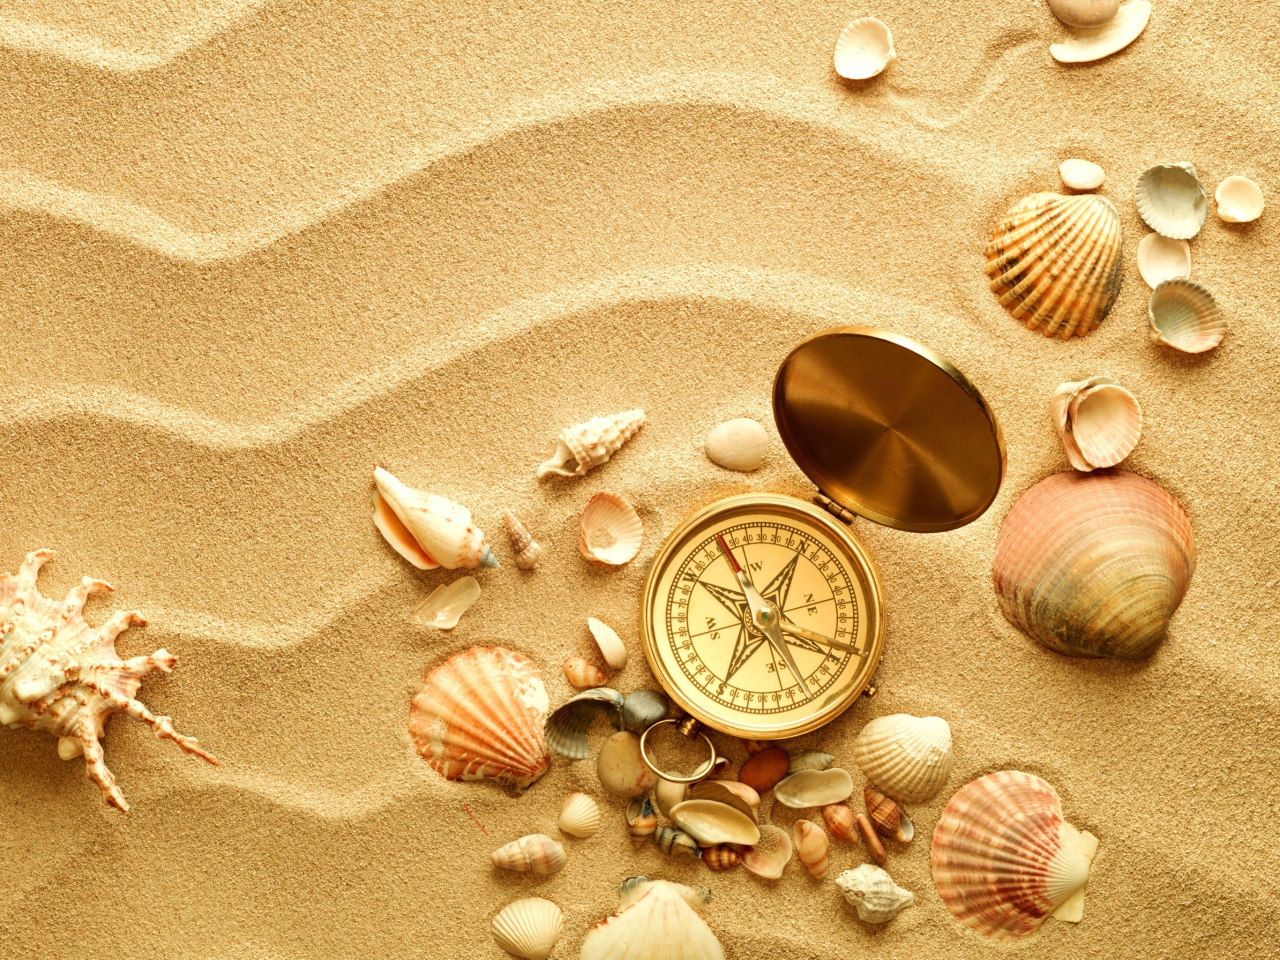 Compass And Shells On Sand wallpaper 1280x960